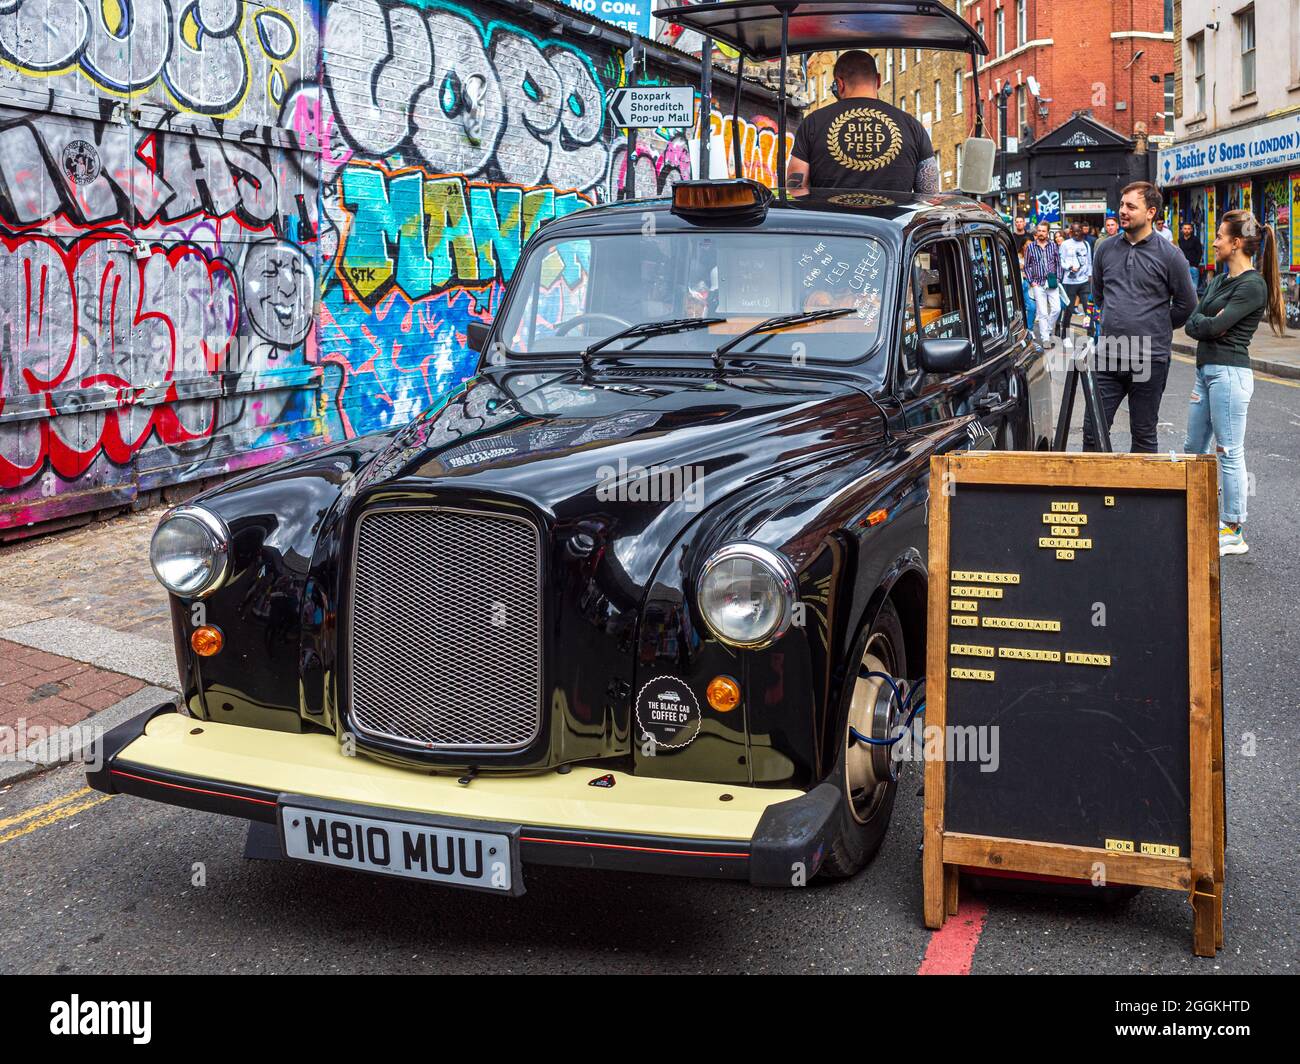 London Taxi Coffee - Black Cab Coffee Company uses a converted London Taxi to serve coffee in Brick Lane Shoreditch East London. Stock Photo